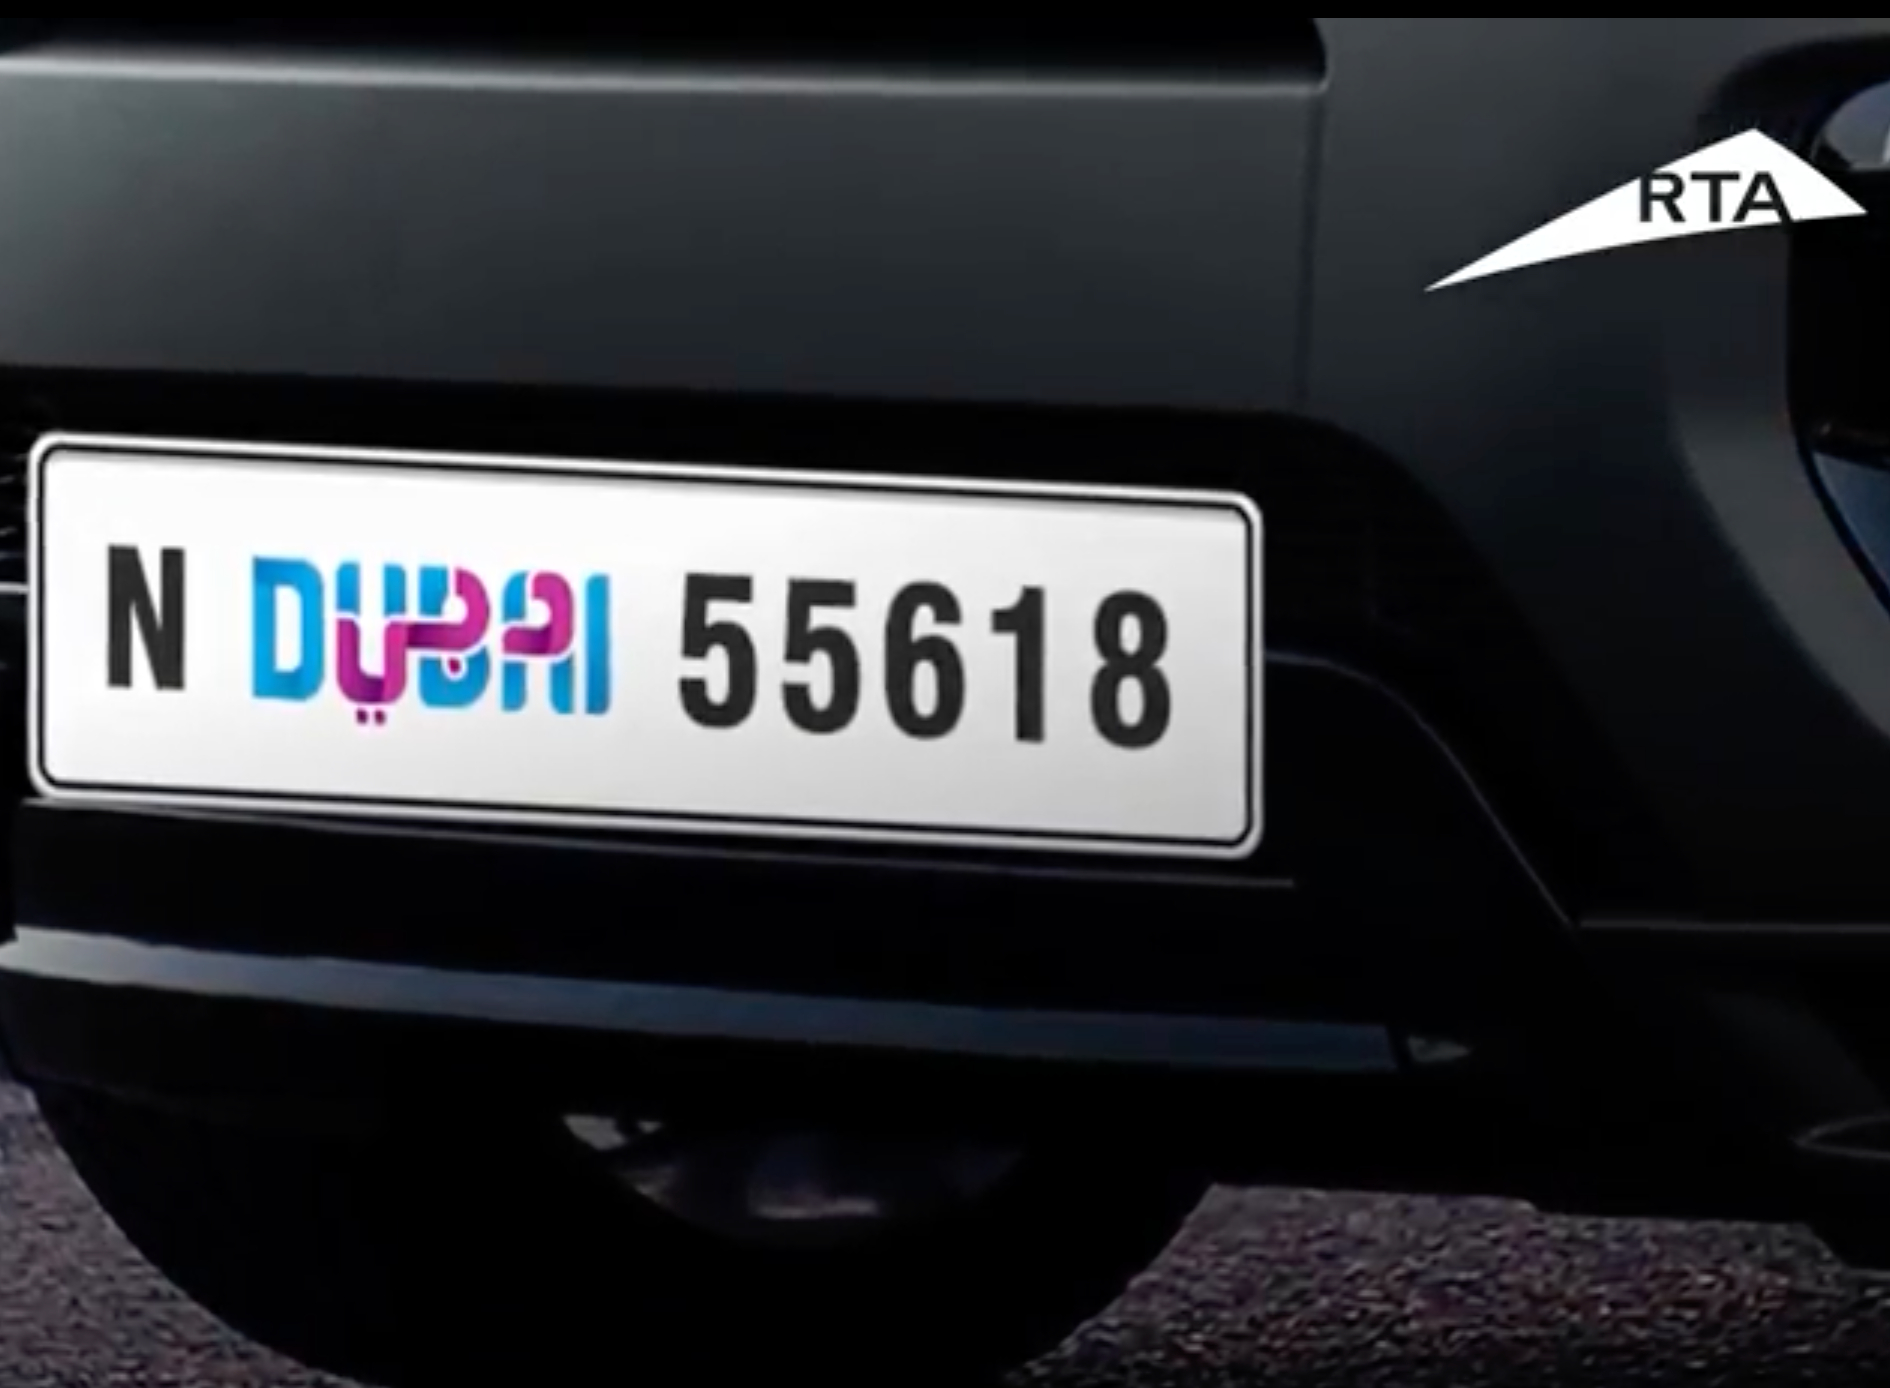 Reserve your plate number video